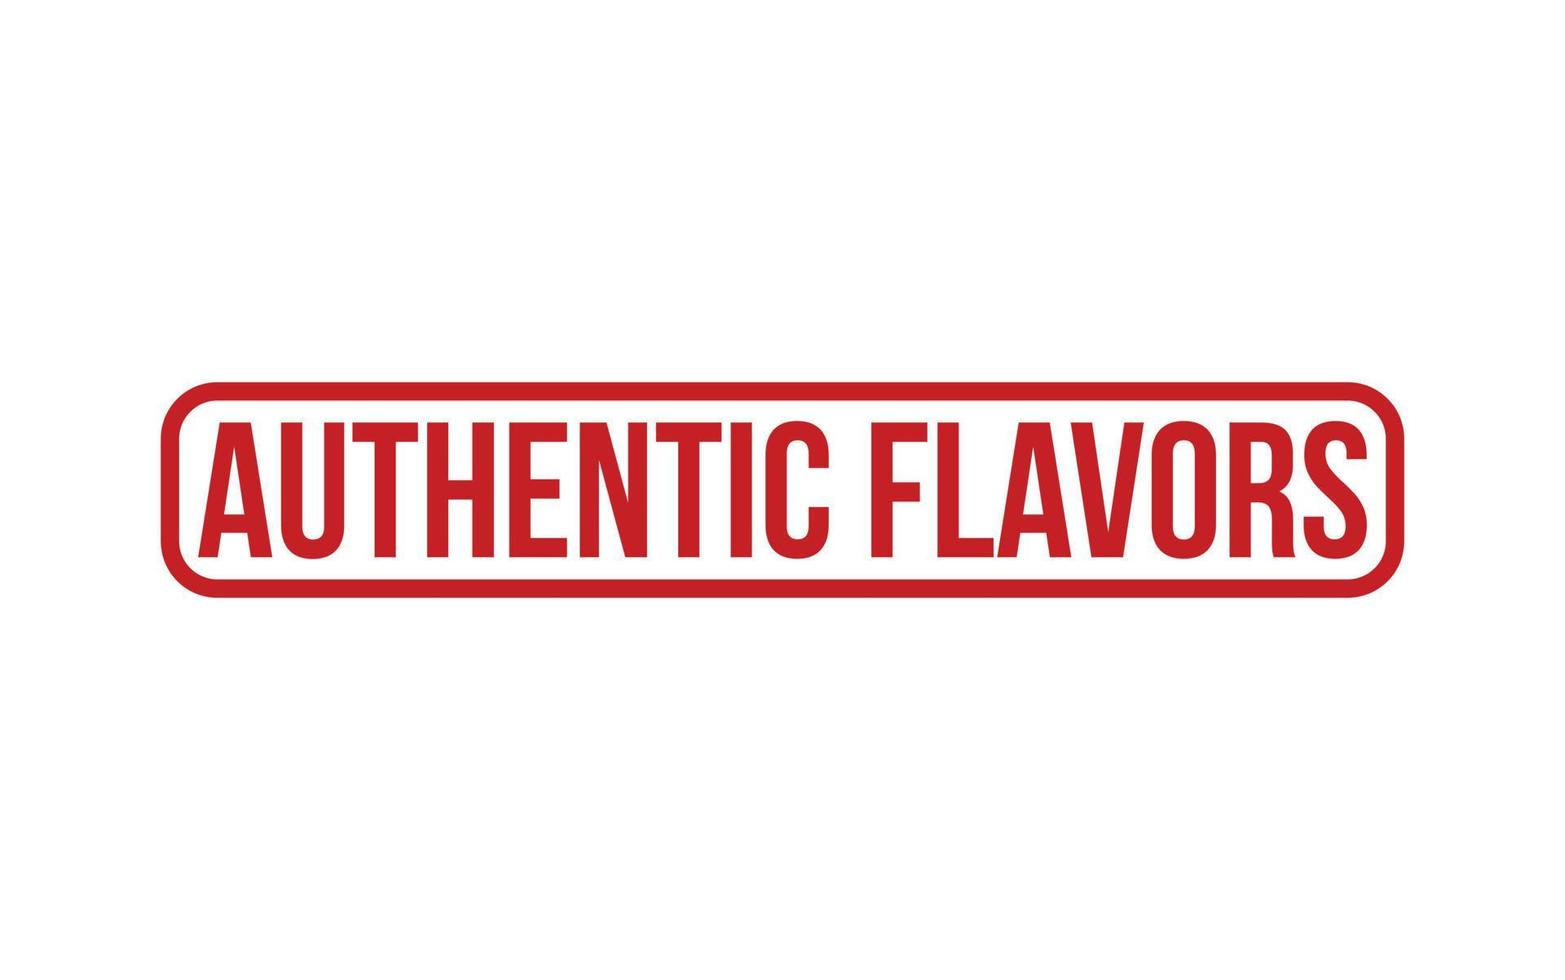 Authentic Flavors Rubber Stamp Seal Vector